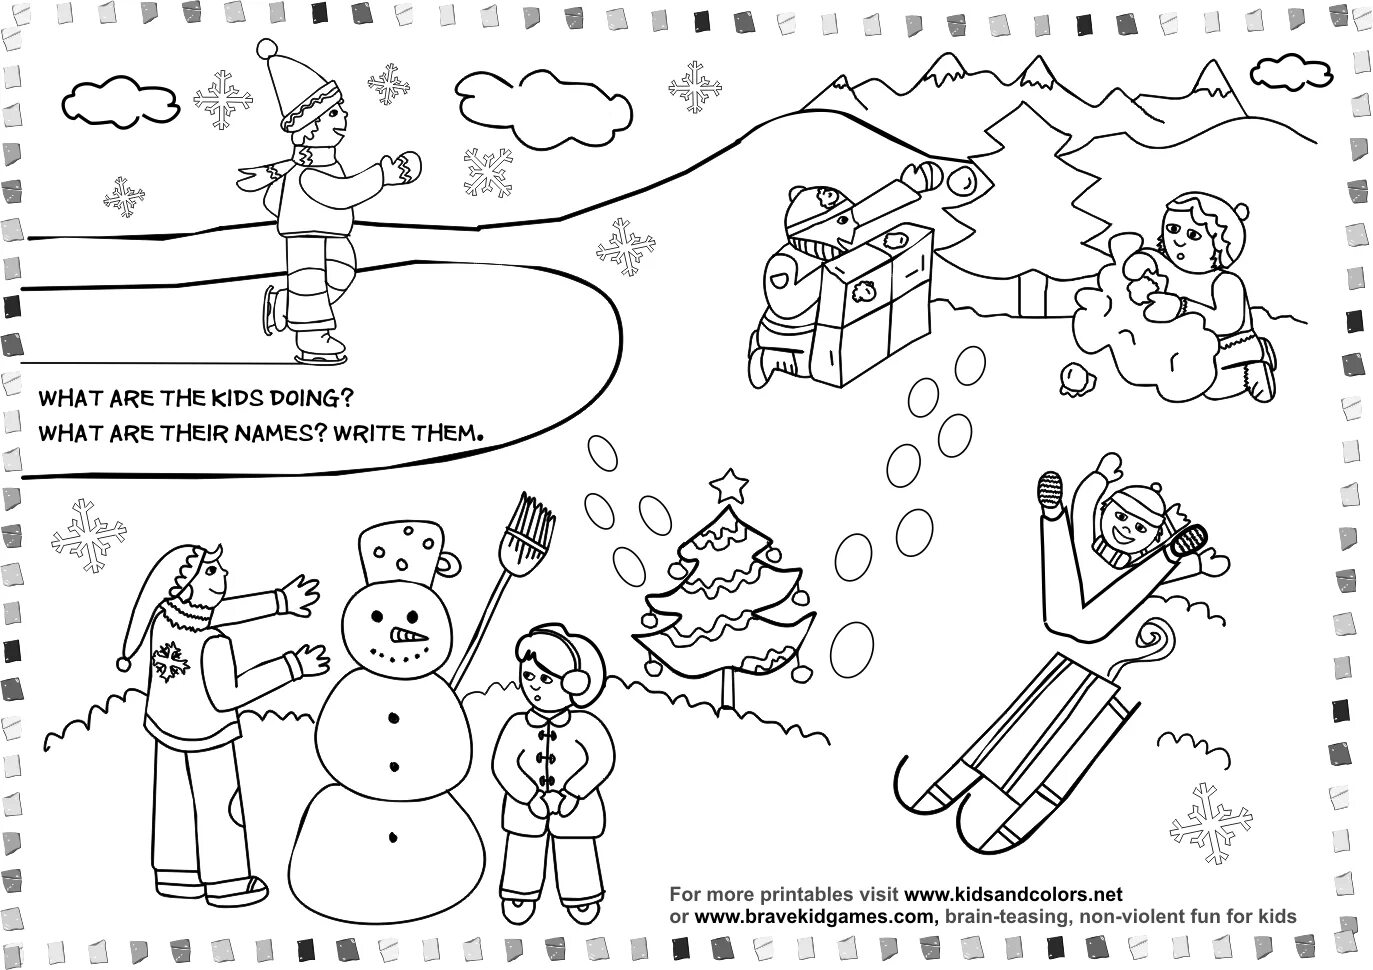 Winter games for kids #3